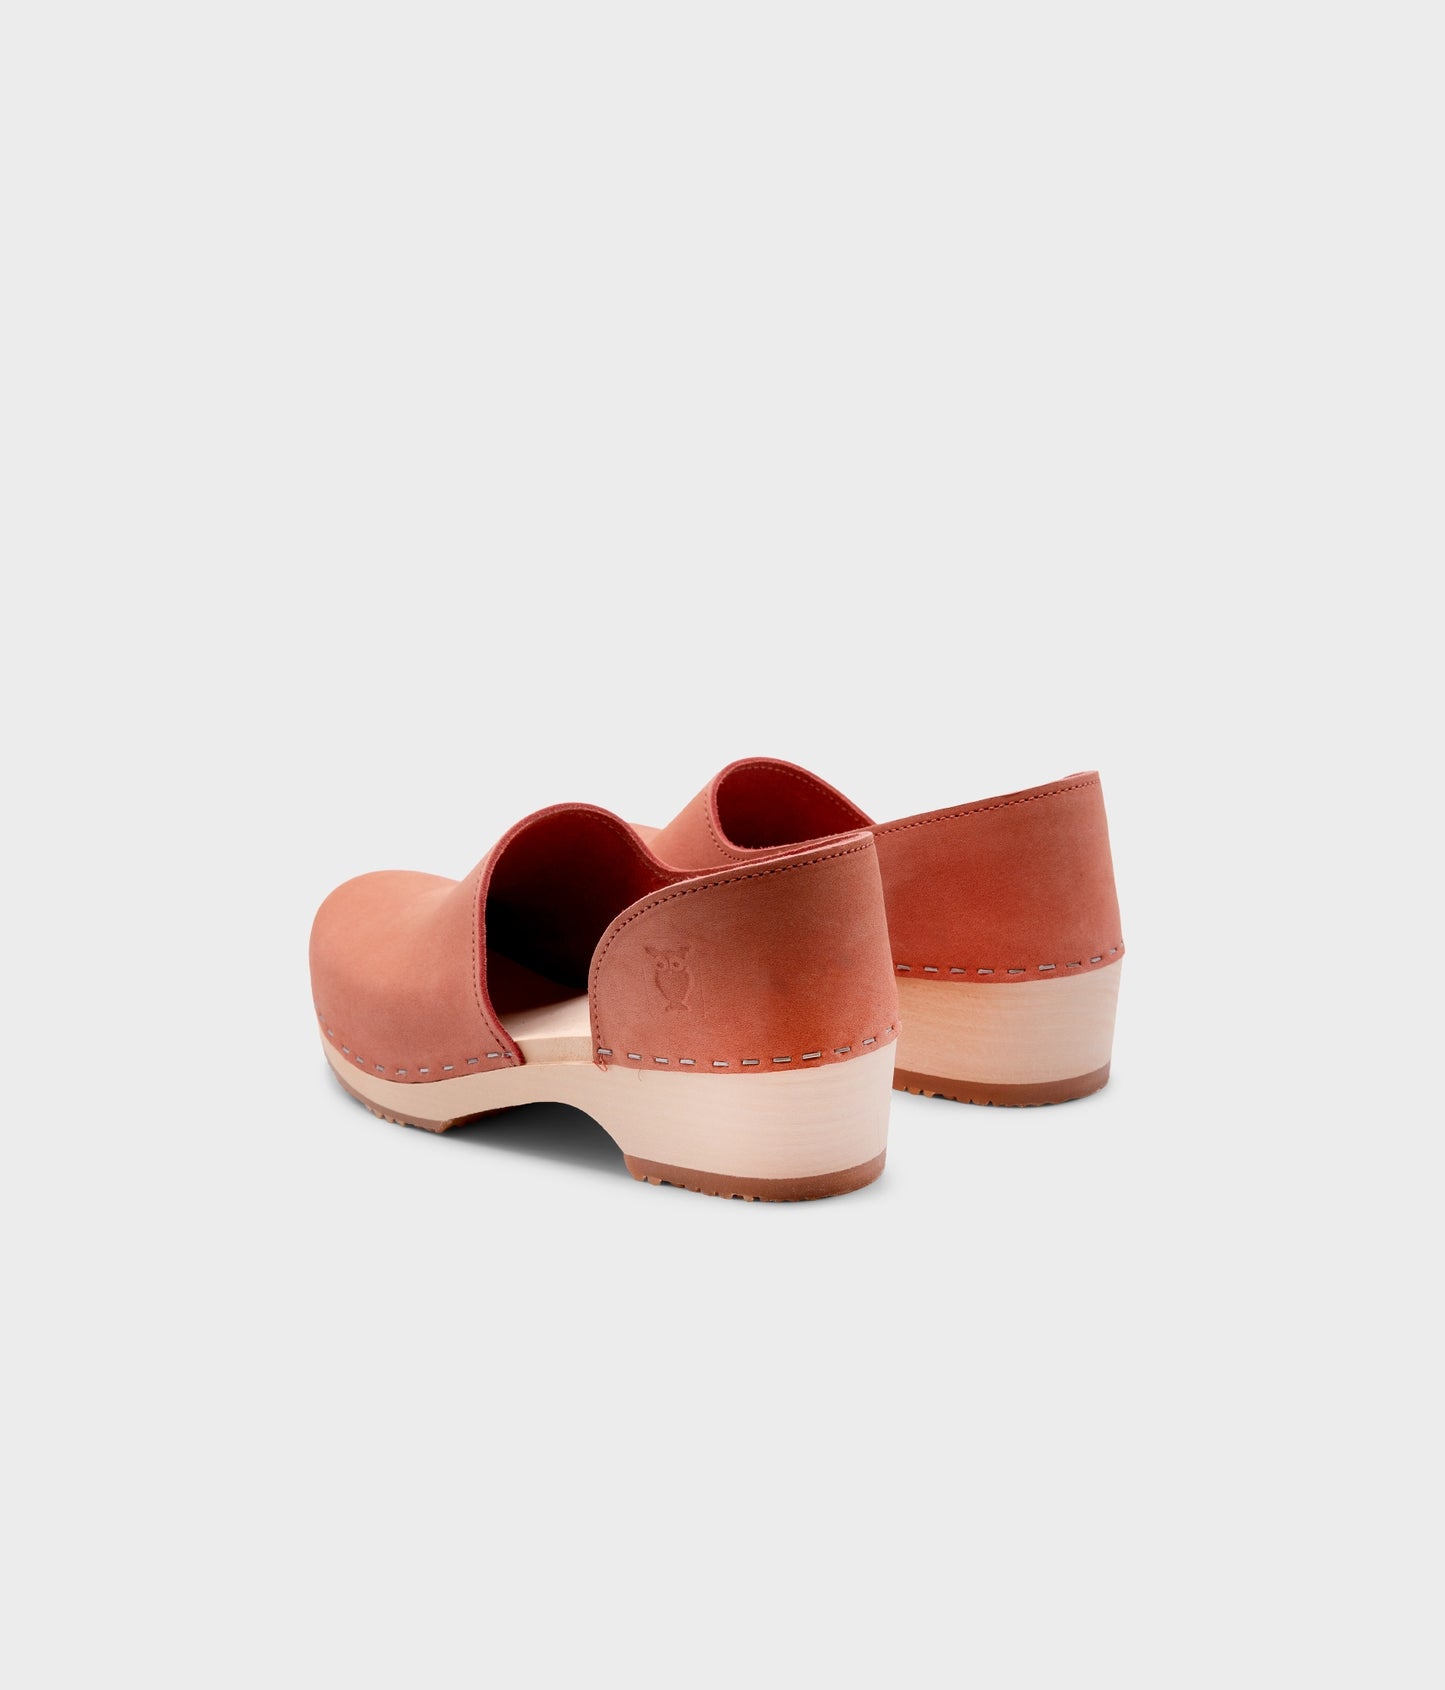 low heeled closed-back clogs in blush pink nubuck leather stapled on a light wooden base